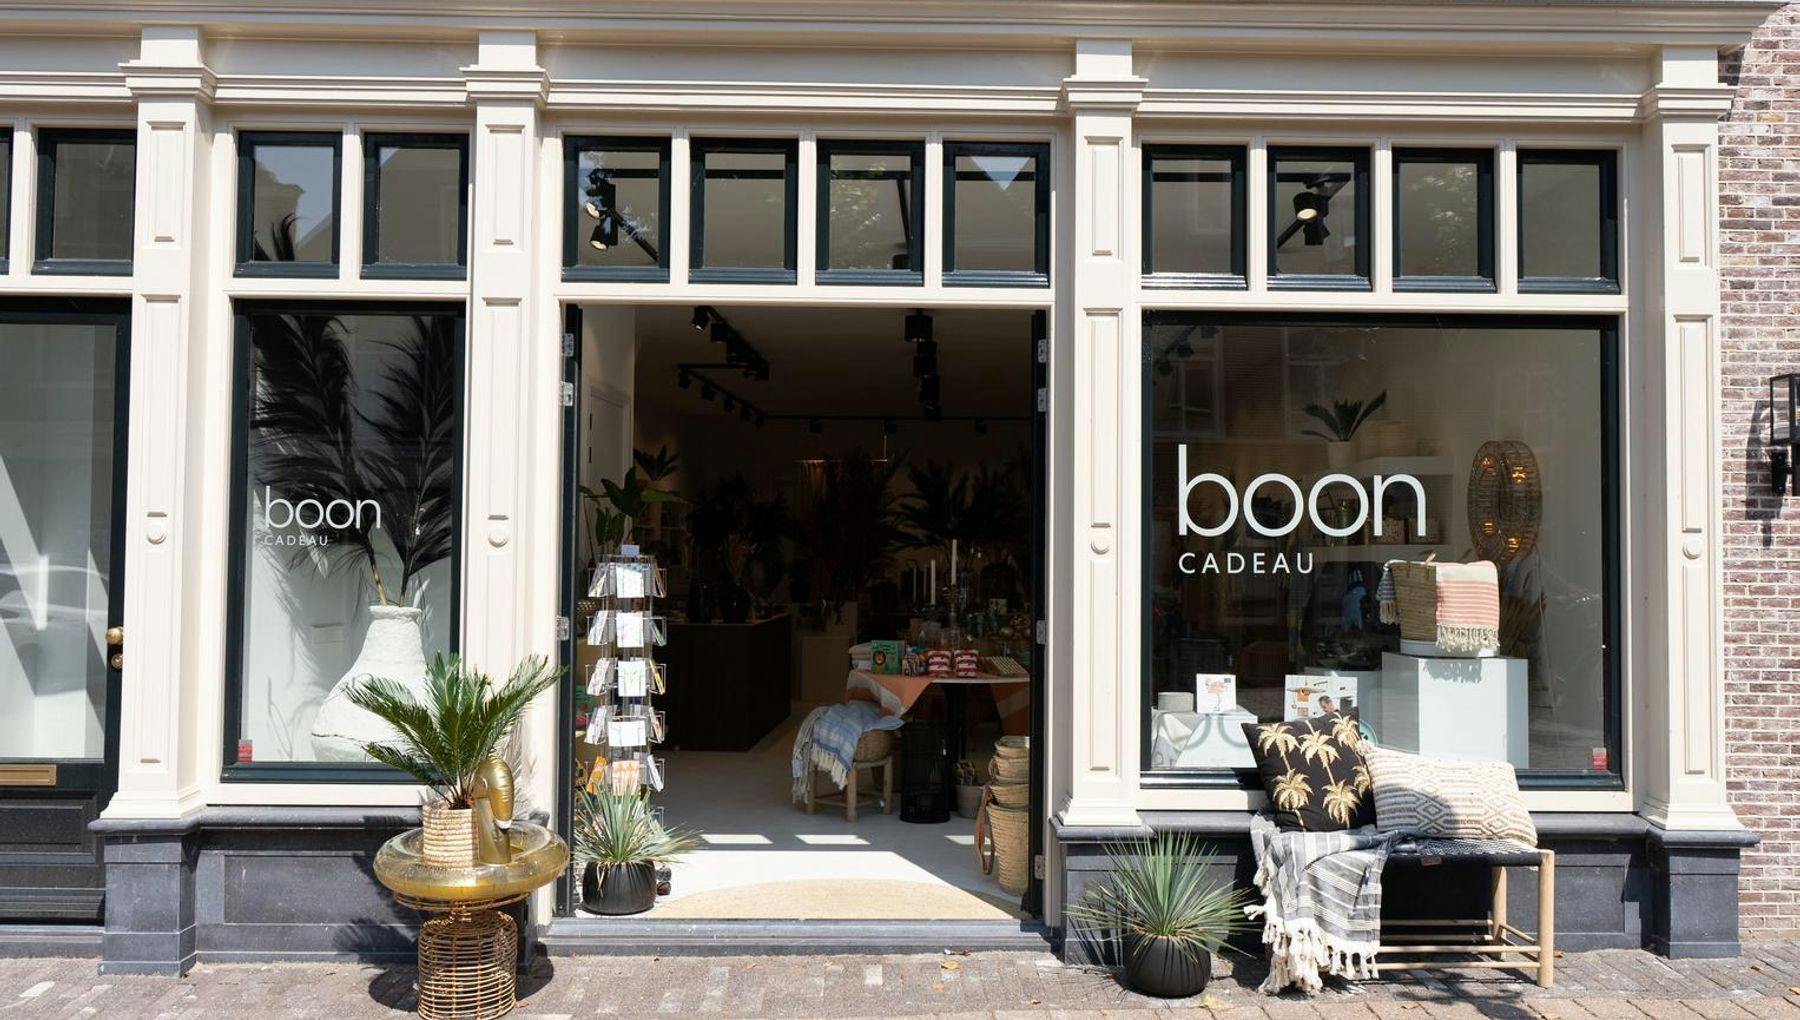 The entrance of Boon Cadeau in Weesp